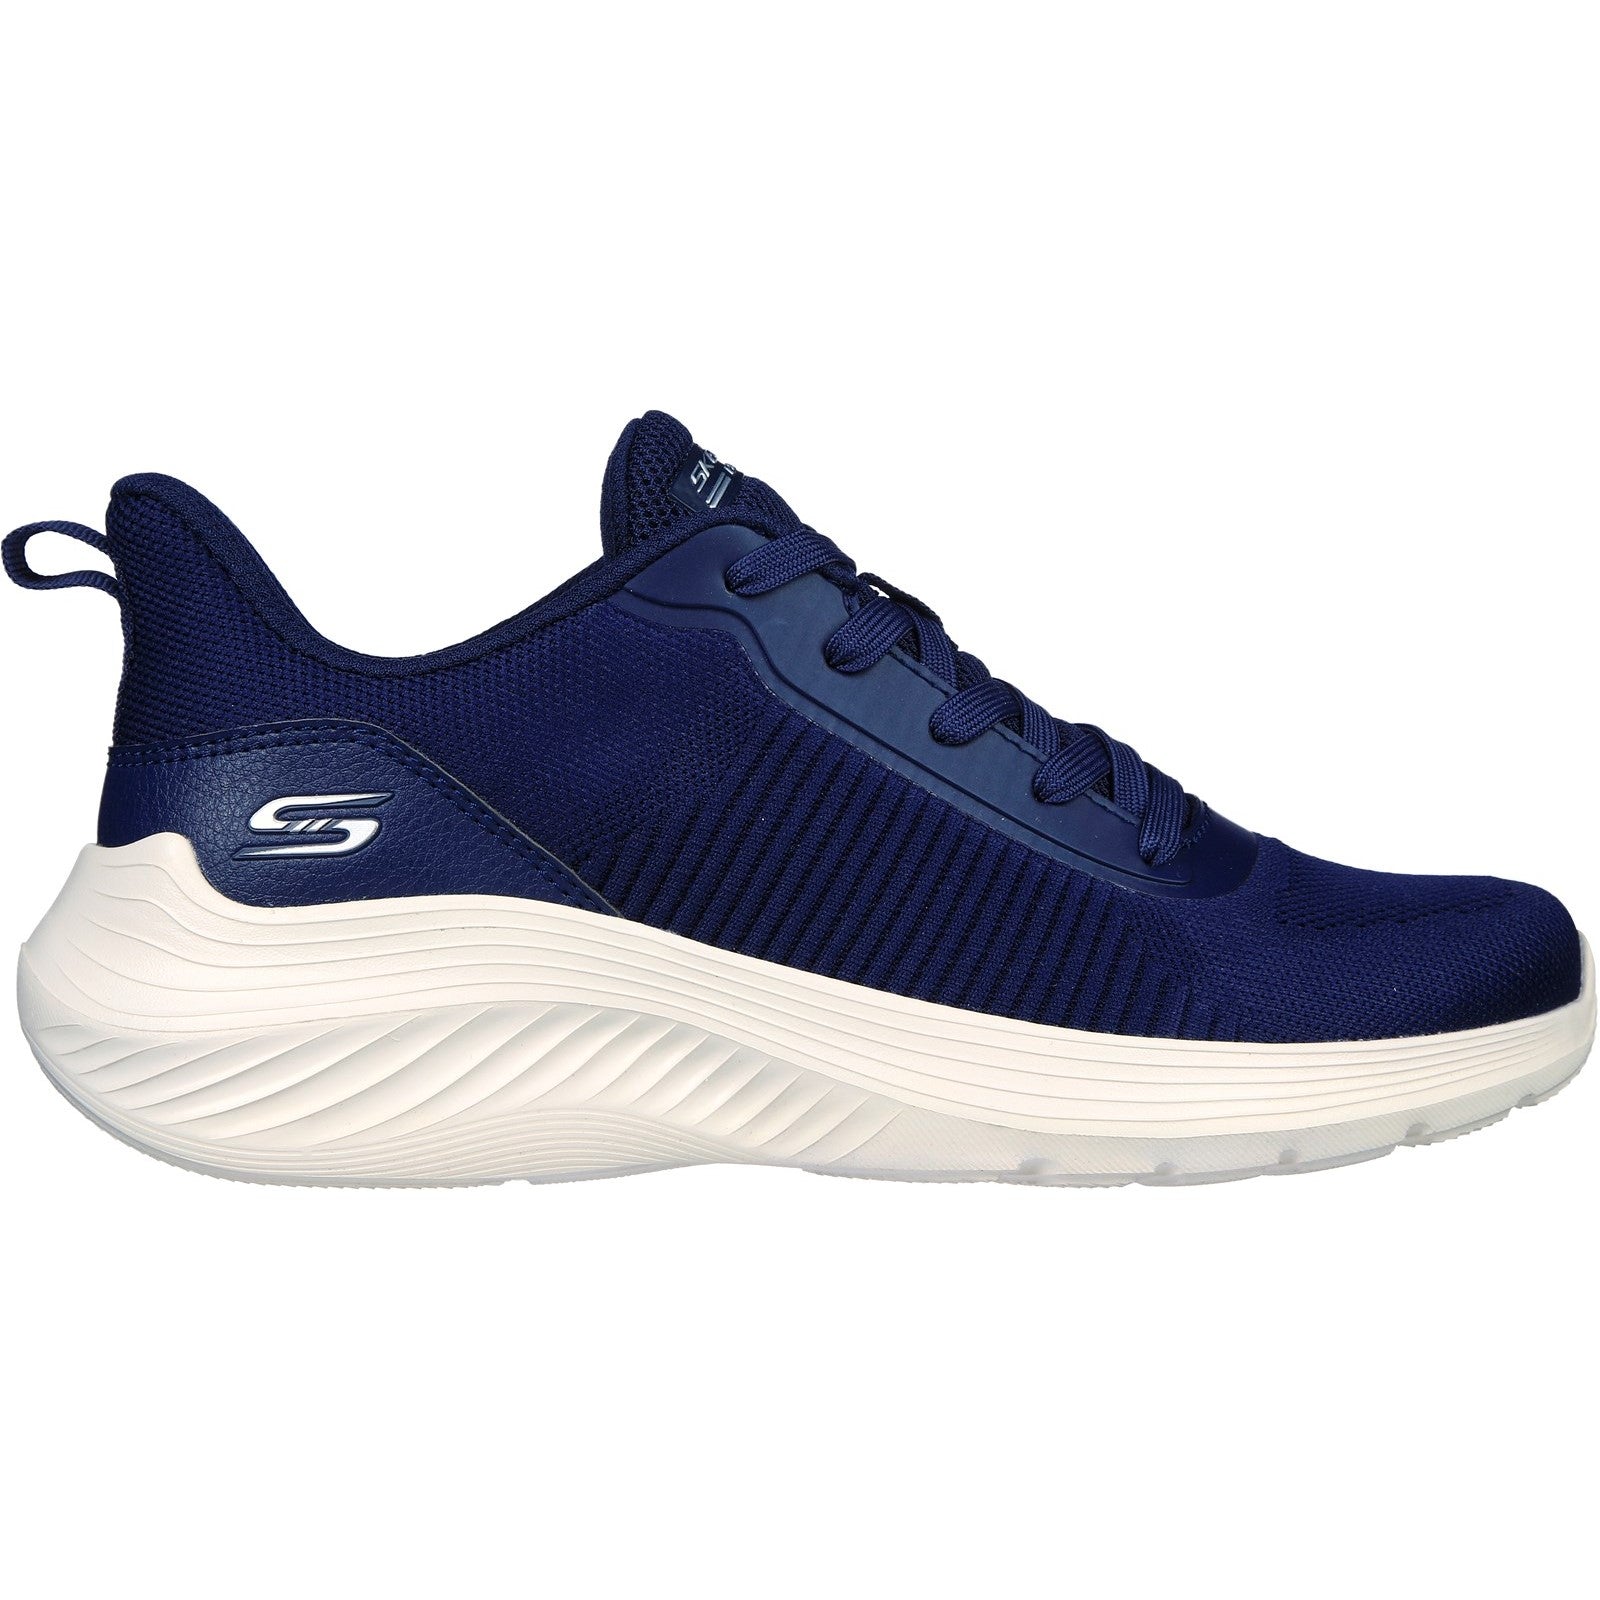 Skechers Womens Bobs Squad Waves Trainers - Navy